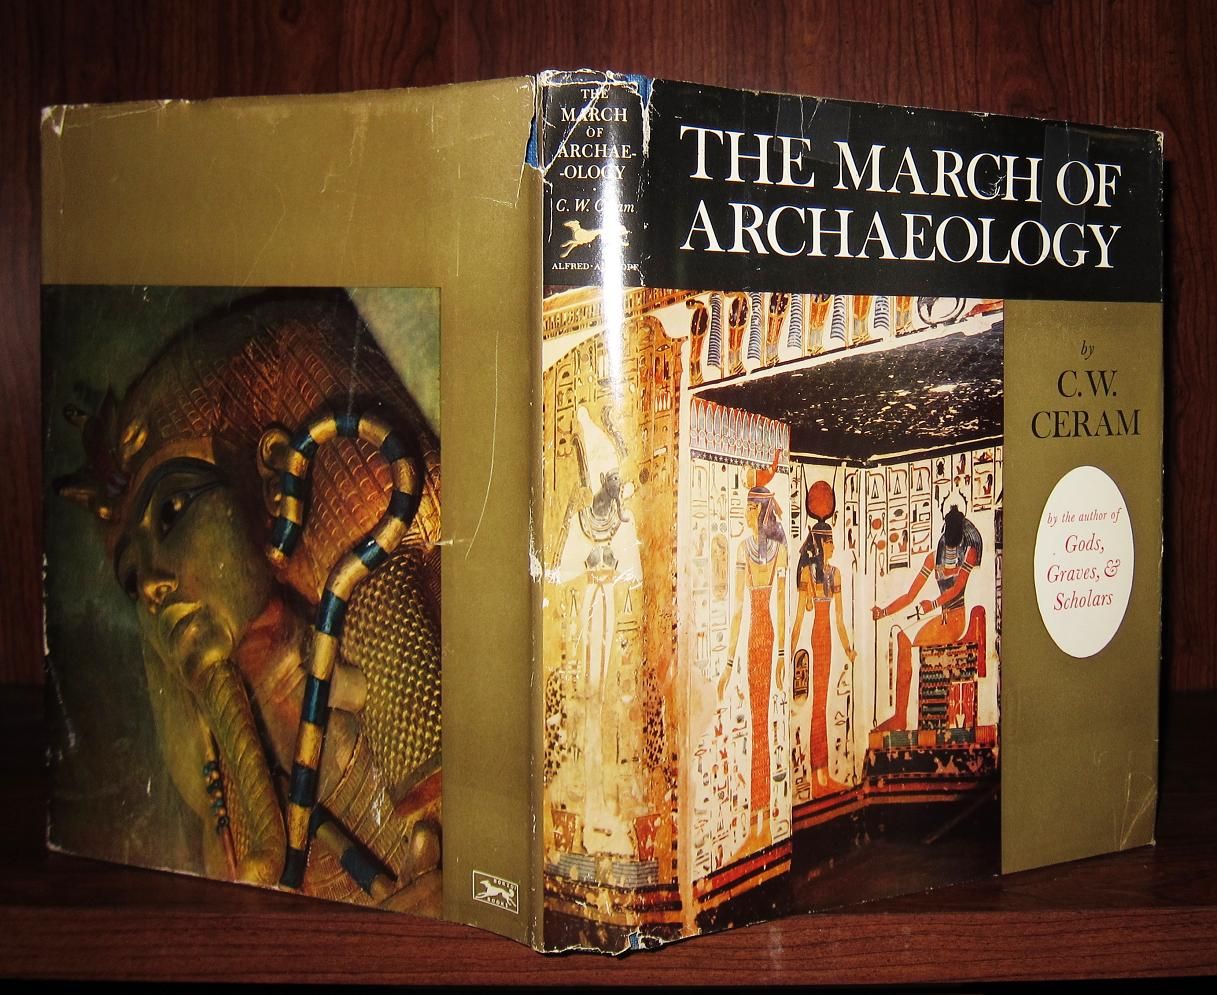 CERAM, C. W. - The March of Archaeology